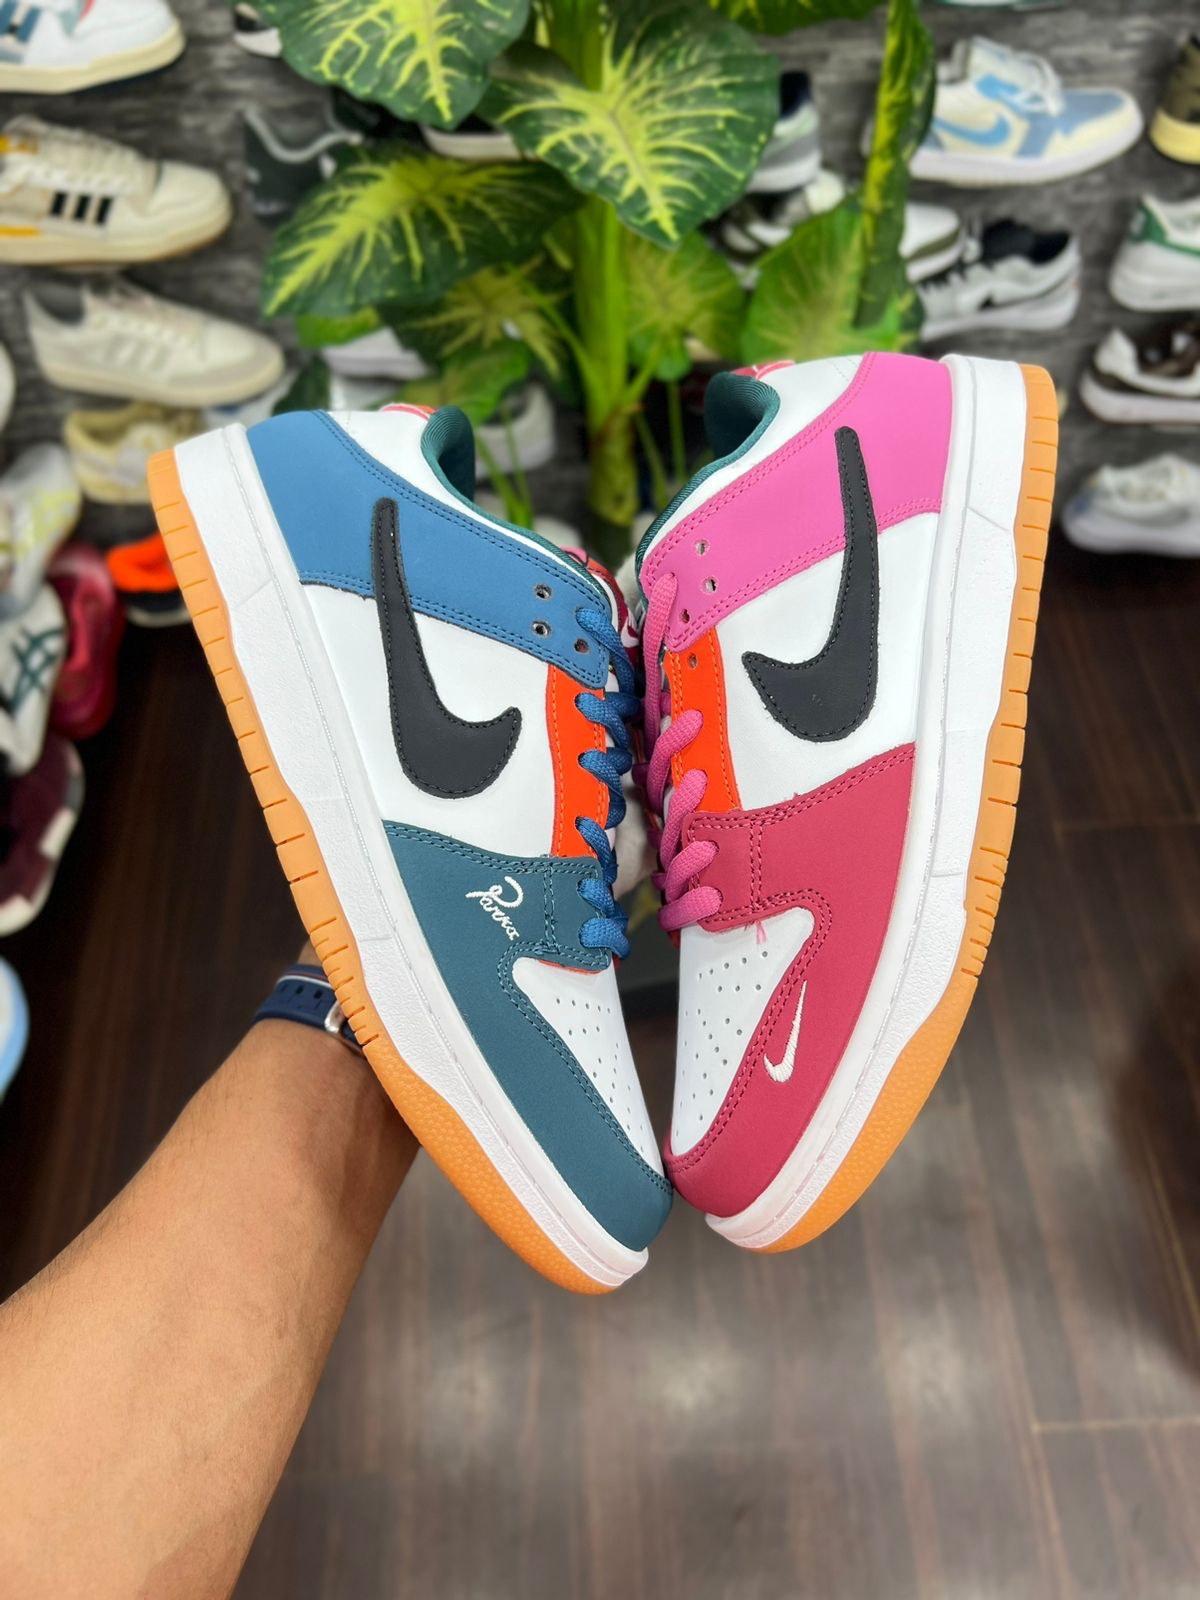 SB Dunk Parra Sneakers In Stock High Quality